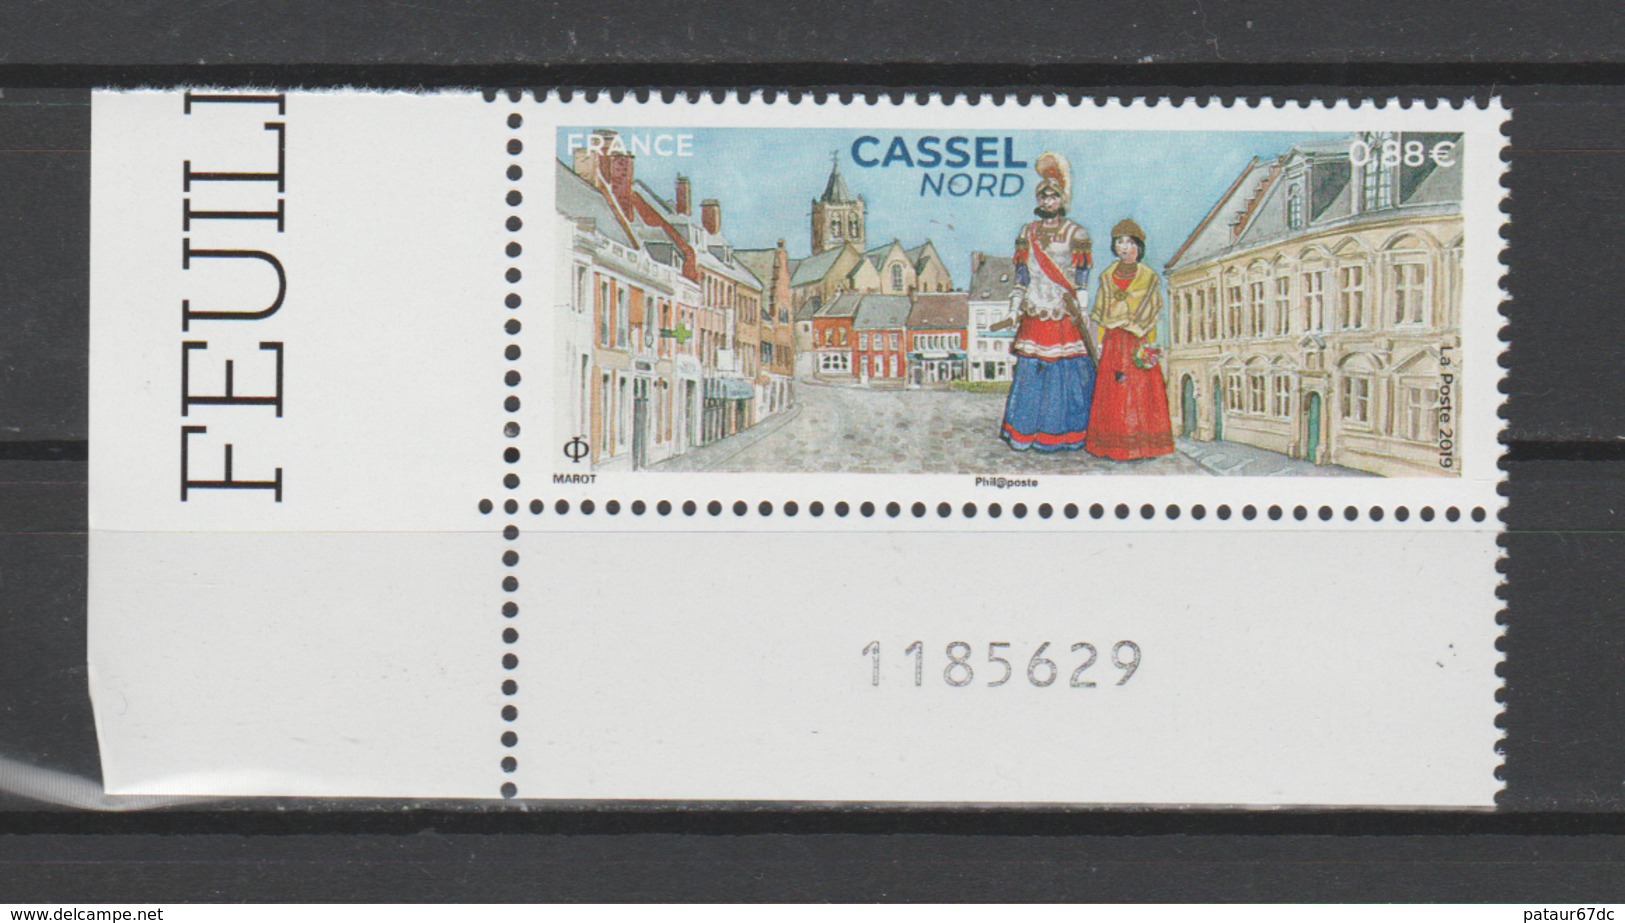 FRANCE / 2019 / Y&T N° 5336 ** : Cassel (Nord) CdF Inf G - Gomme D'origine Intacte - Unused Stamps